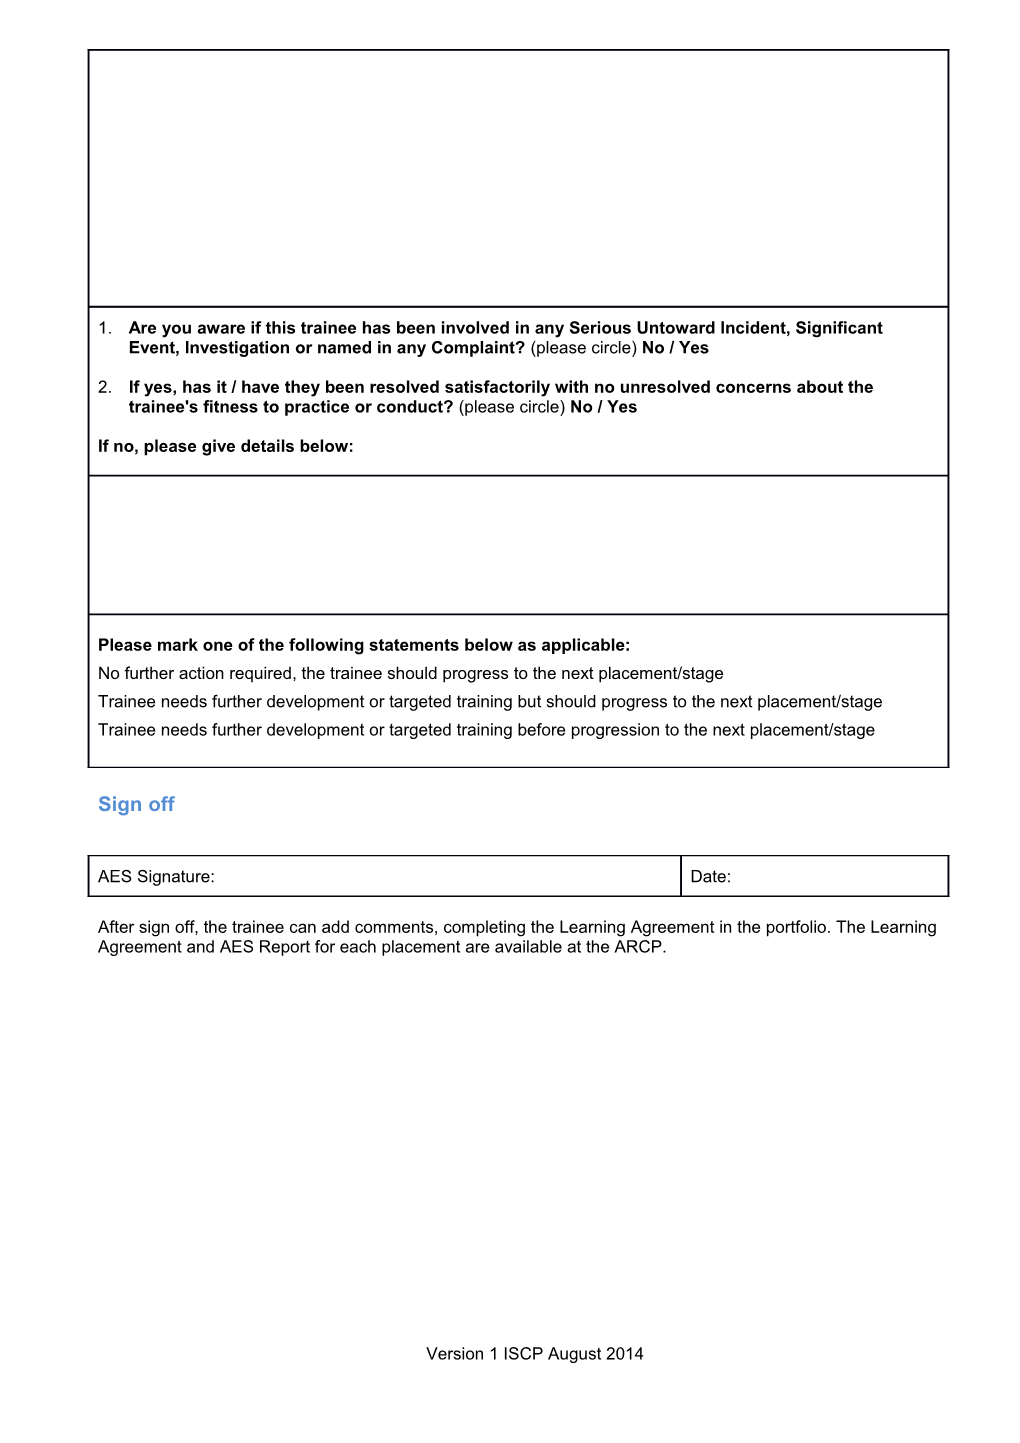 ISCP AES Report Template (For Illustrative Purposes Only Please Use Online Version)